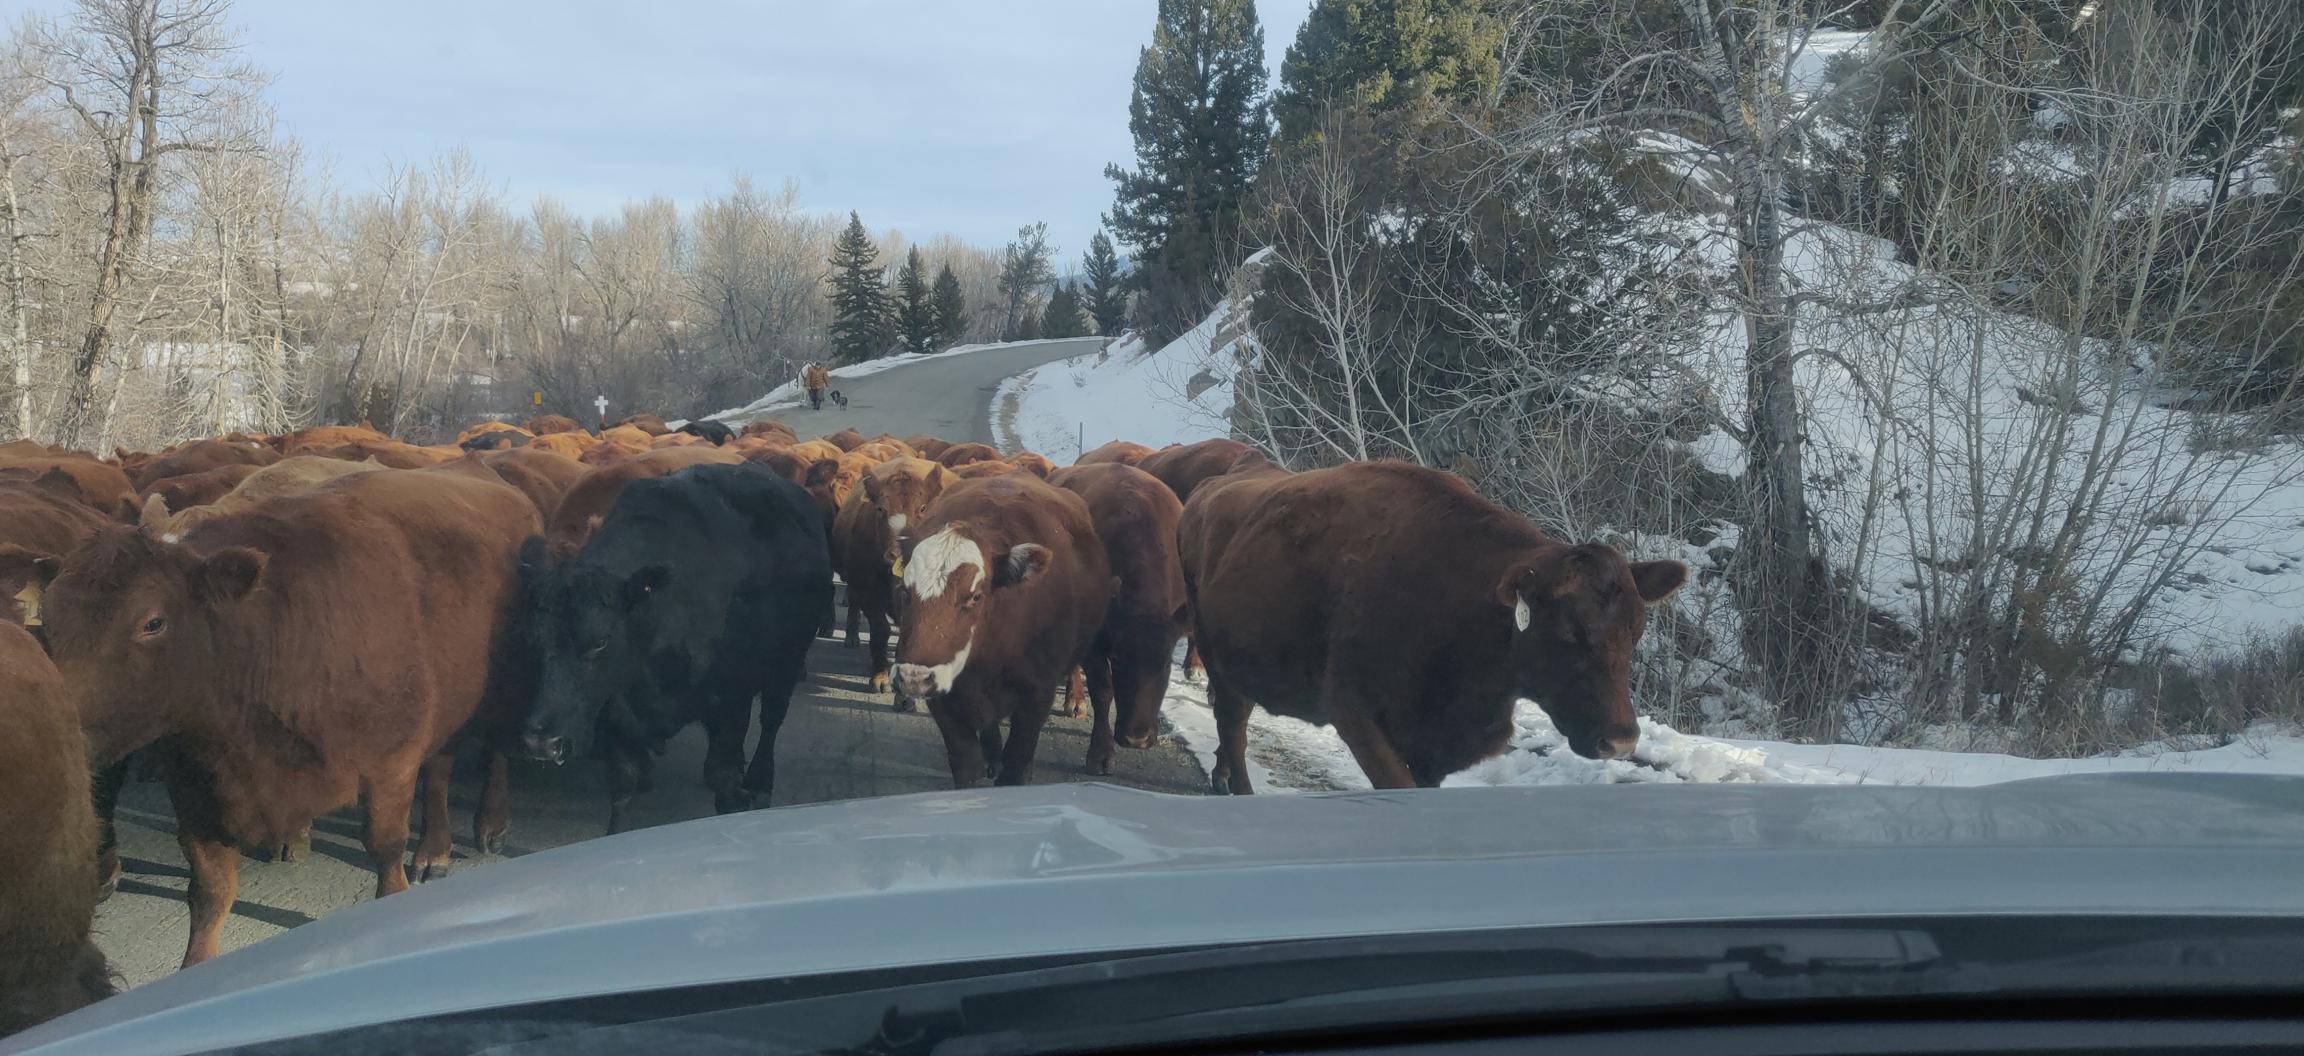 First of two (!) herds of cows commuting to greener pastures en route to the cabin